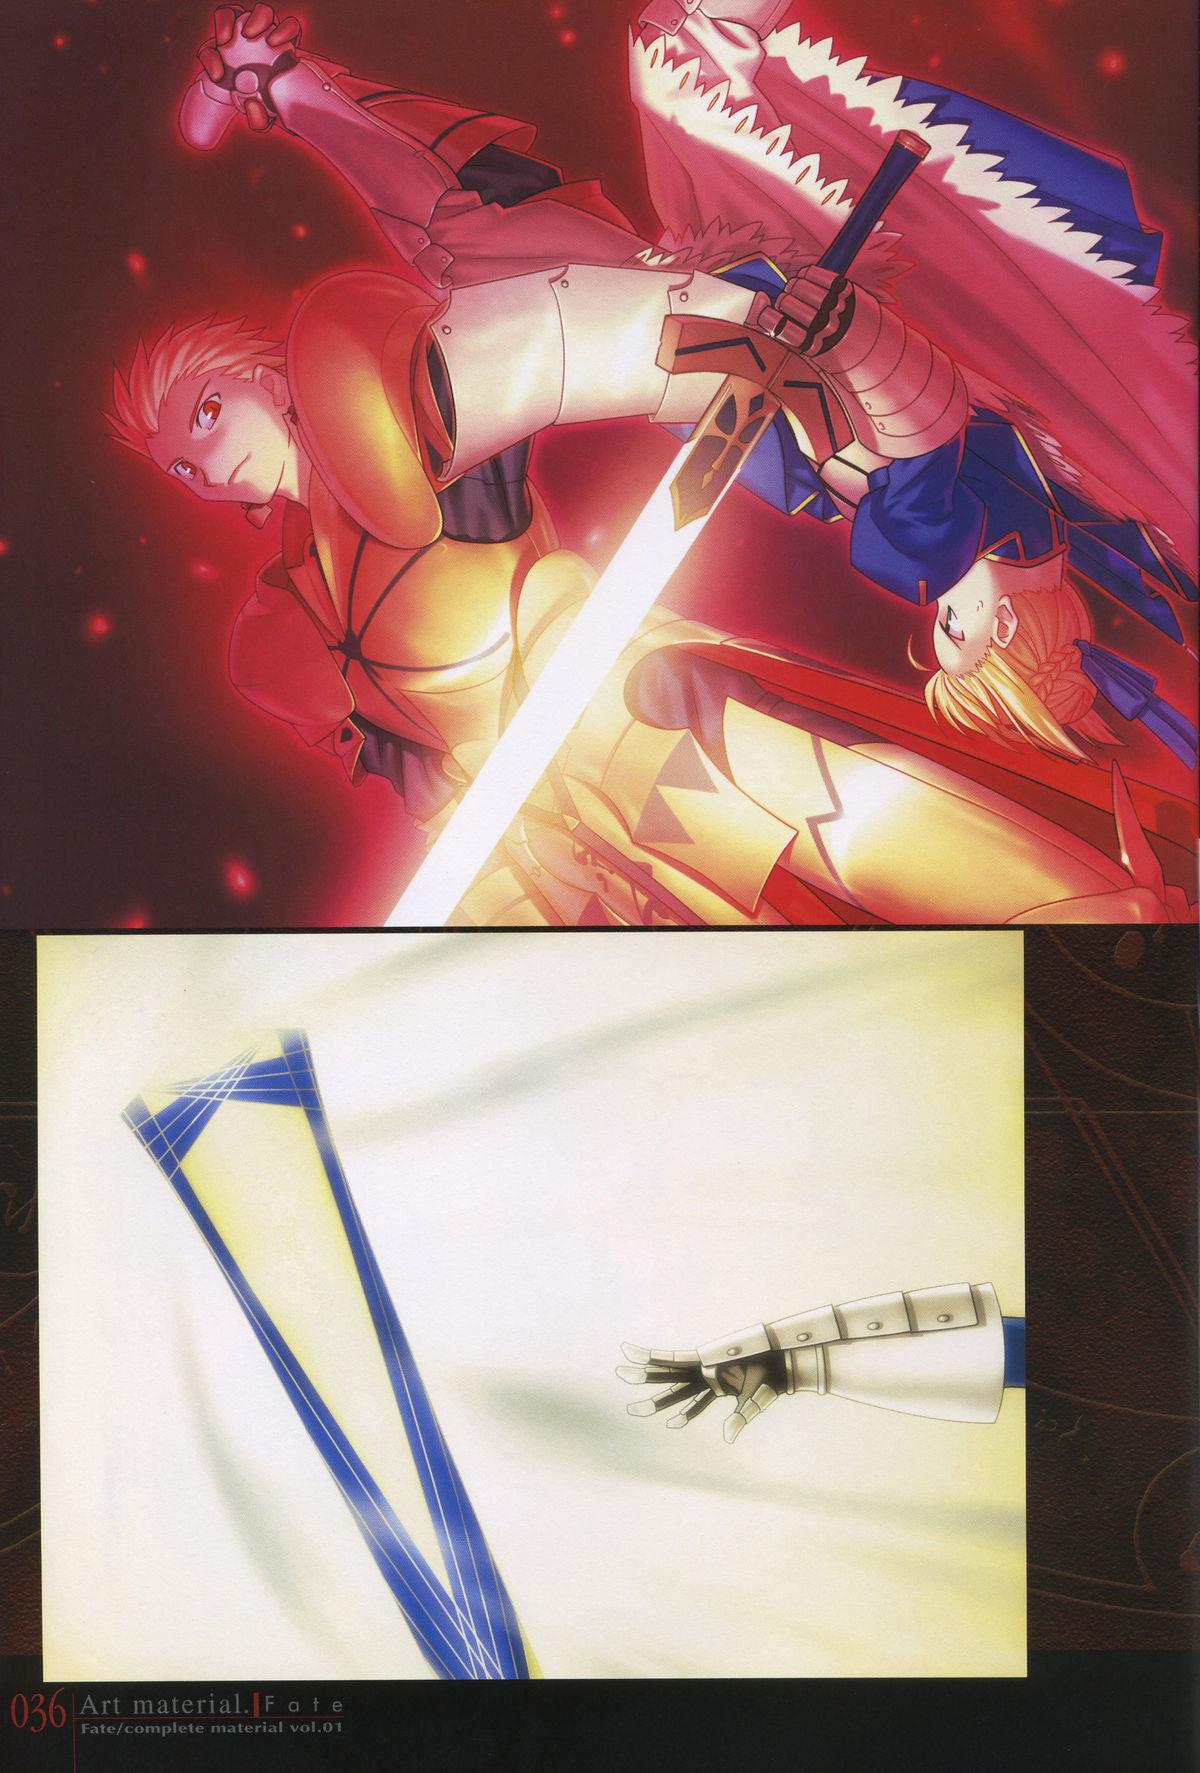 Fate/complete material I - Art material. 40